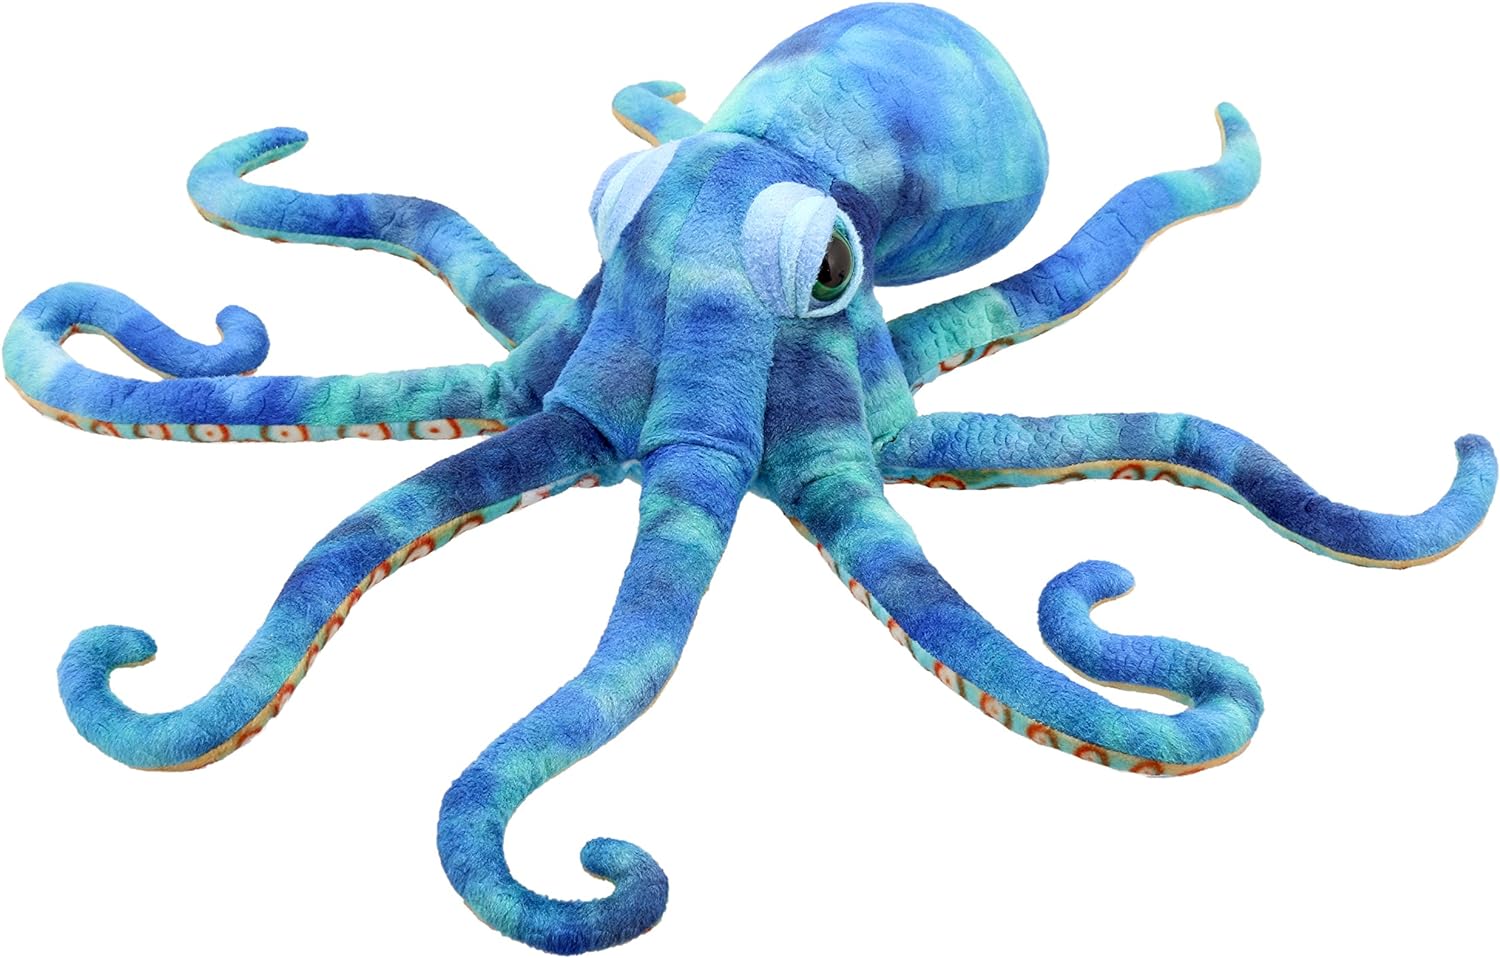 Large Creatures 16" Octopus Puppet